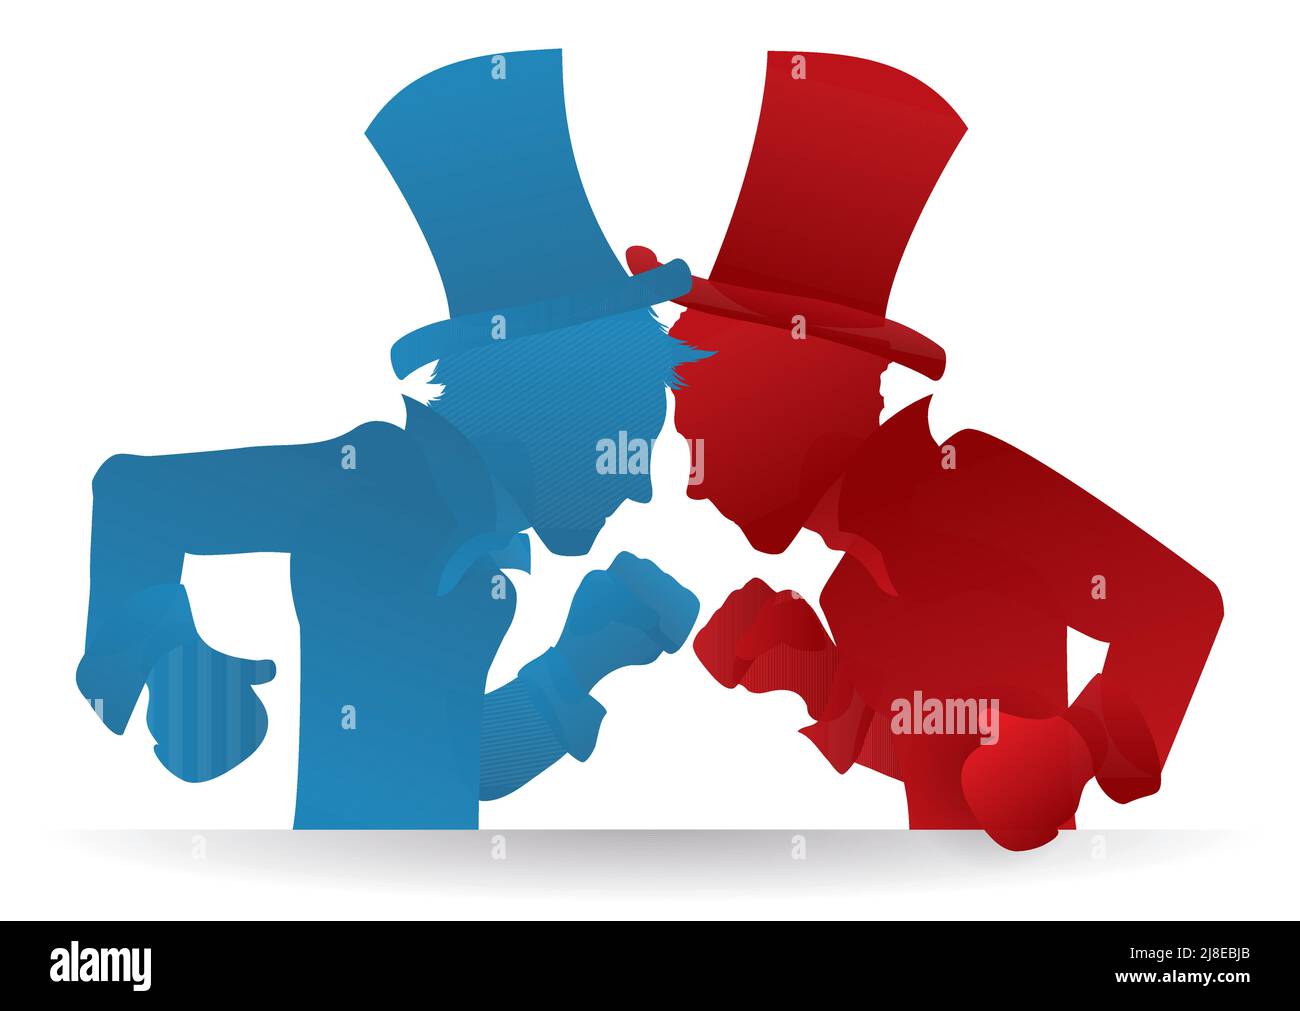 Blue and red silhouettes of traditional American partisans, ready to fight during elections rally. Stock Vector